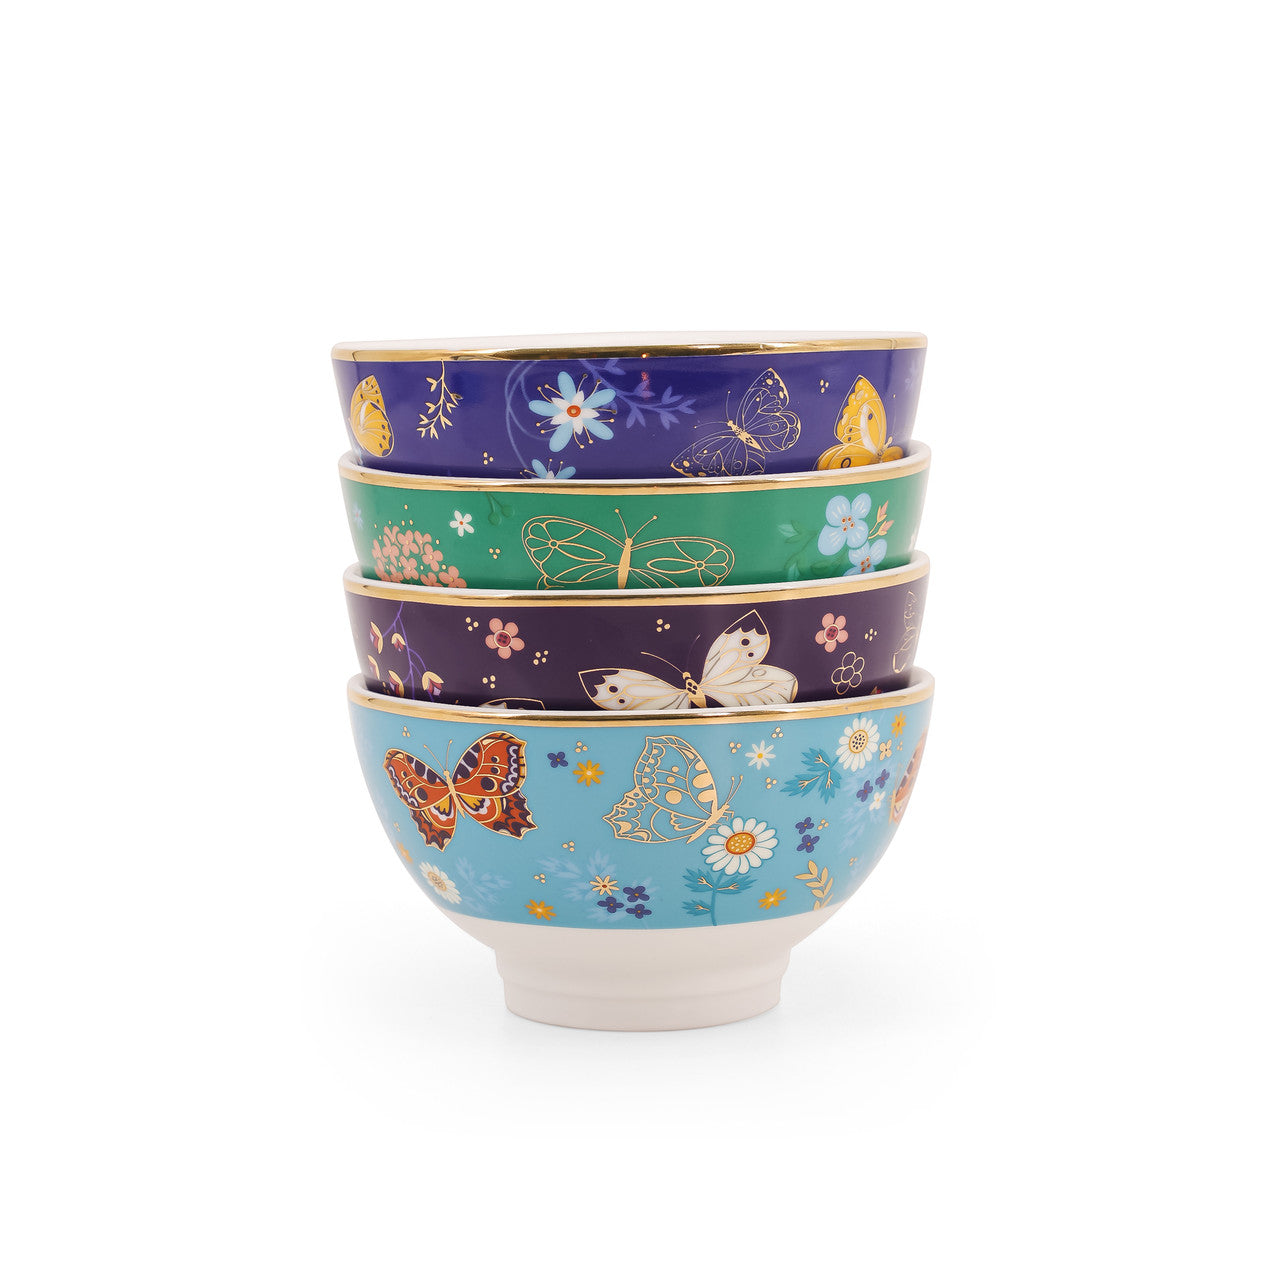 Tipperary Crystal Butterfly S/4 Cereal Bowls  Drawing inspiration from urban garden, the Tipperary Crystal Butterfly collection transforms an icon into something modern and unexpected. Playful and elegant, this collection draws from the inherent beauty of the butterfly.